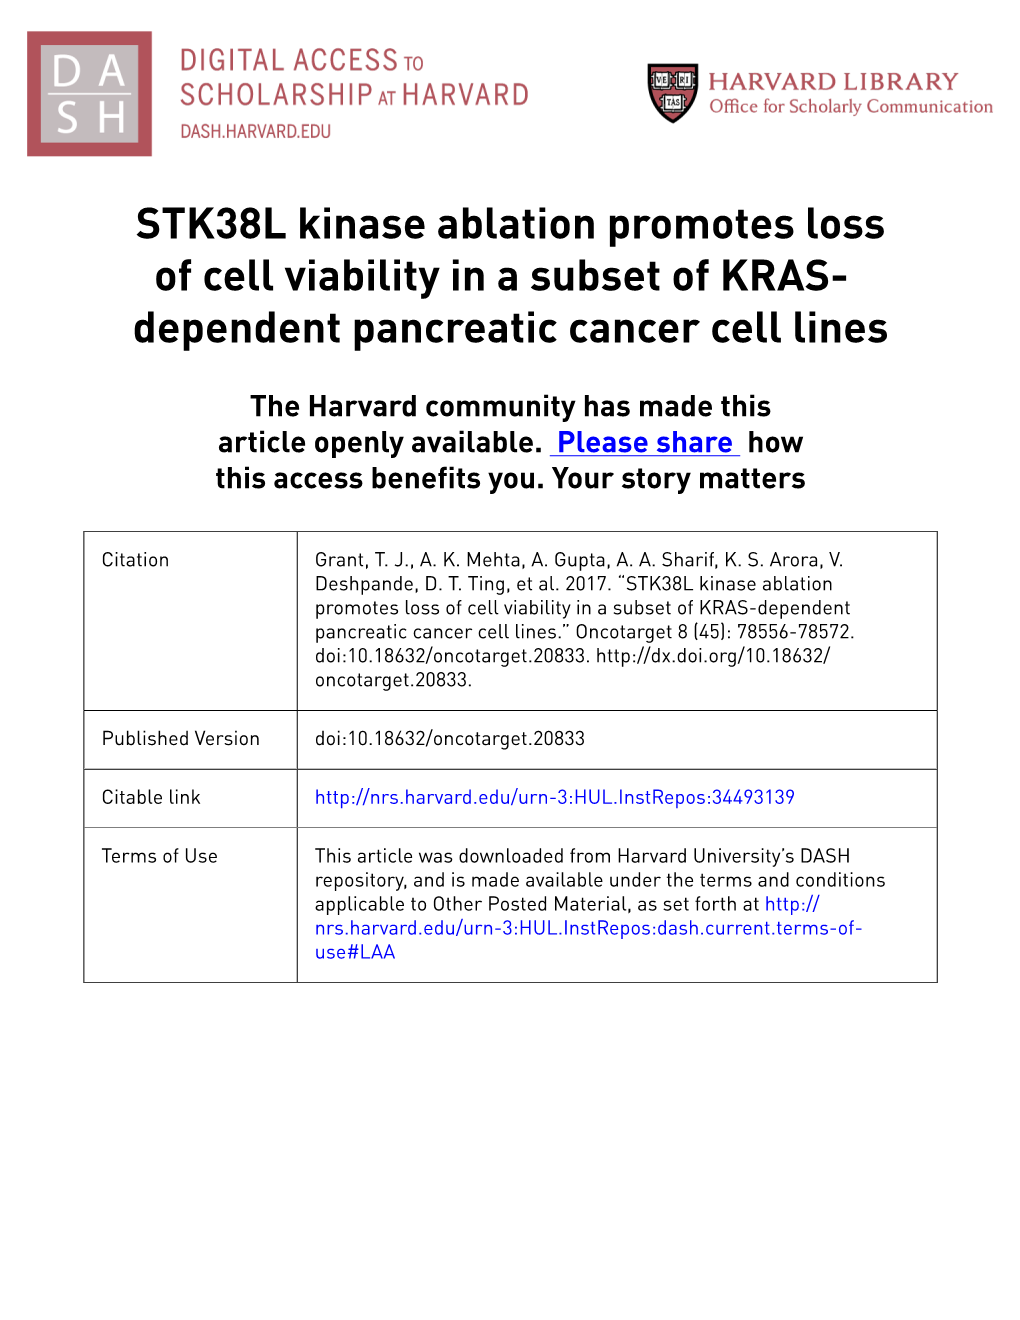 STK38L Kinase Ablation Promotes Loss of Cell Viability in a Subset of KRAS- Dependent Pancreatic Cancer Cell Lines